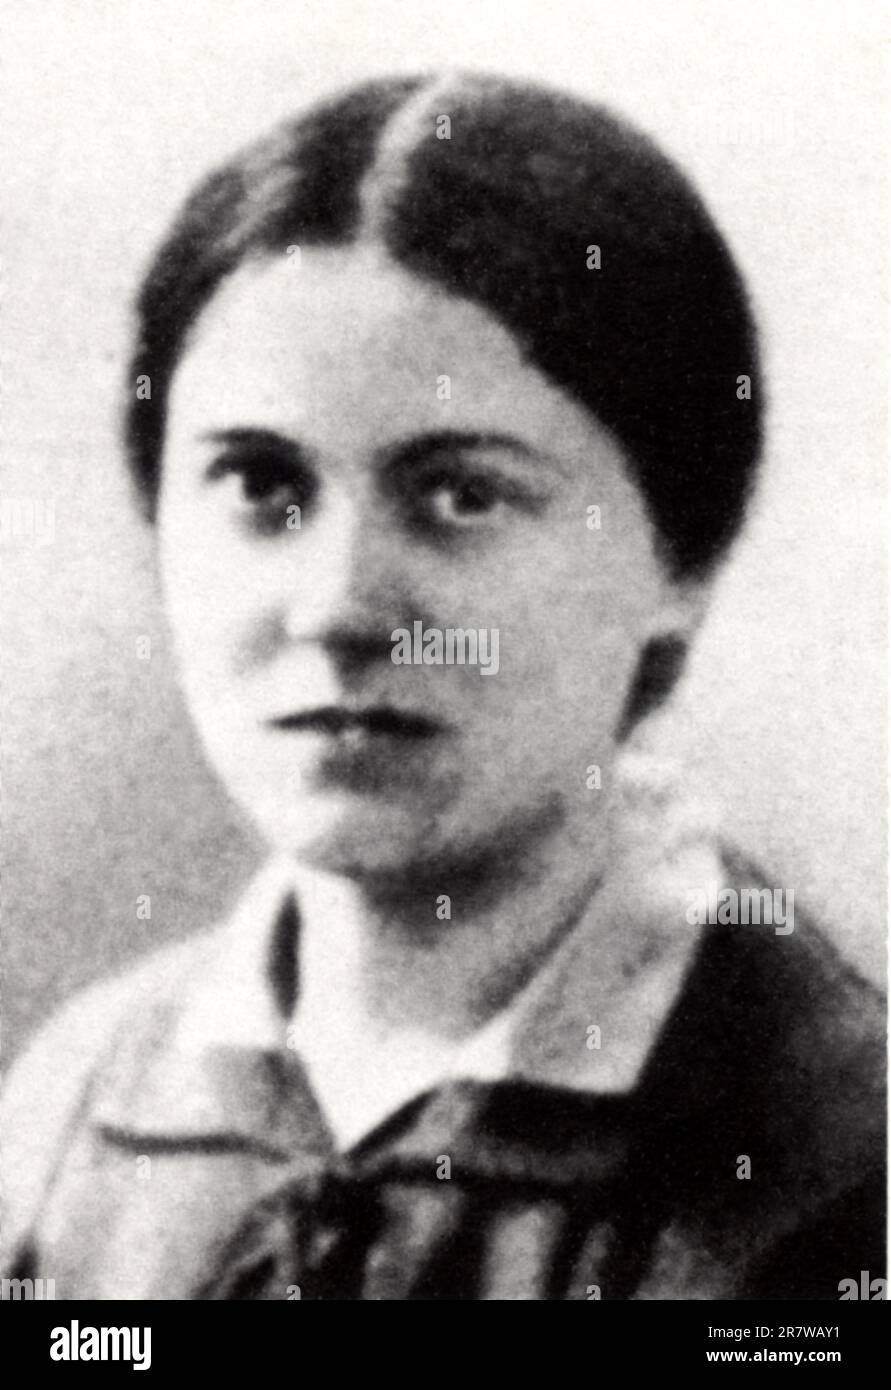 1915 c, GERMANY: The german woman philosopher and nun  EDITH STEIN ( 1891 - 1942 ). Born in jewish familly converted to Catholic Religion and became nun in Carmelitans Order , killed during the Shoah by nazism in  Auschwitz extermition camp. She is canonized as a Martyr and Saint of the Catholic Church in 199 by Pope John Paul II, she is one of six co-patron saints of Europe  .Unknown photographer . - SCRITTORE - SCRITRICE - Santità - SANTA - San - LETTERATURA - LITERATURE - letterata - FILOSOFA - FILOSOFO - FILOSOFIA - PHILOSOPHY - portrait - ritratto - convertita - Martire - Canonizzazione - Stock Photo